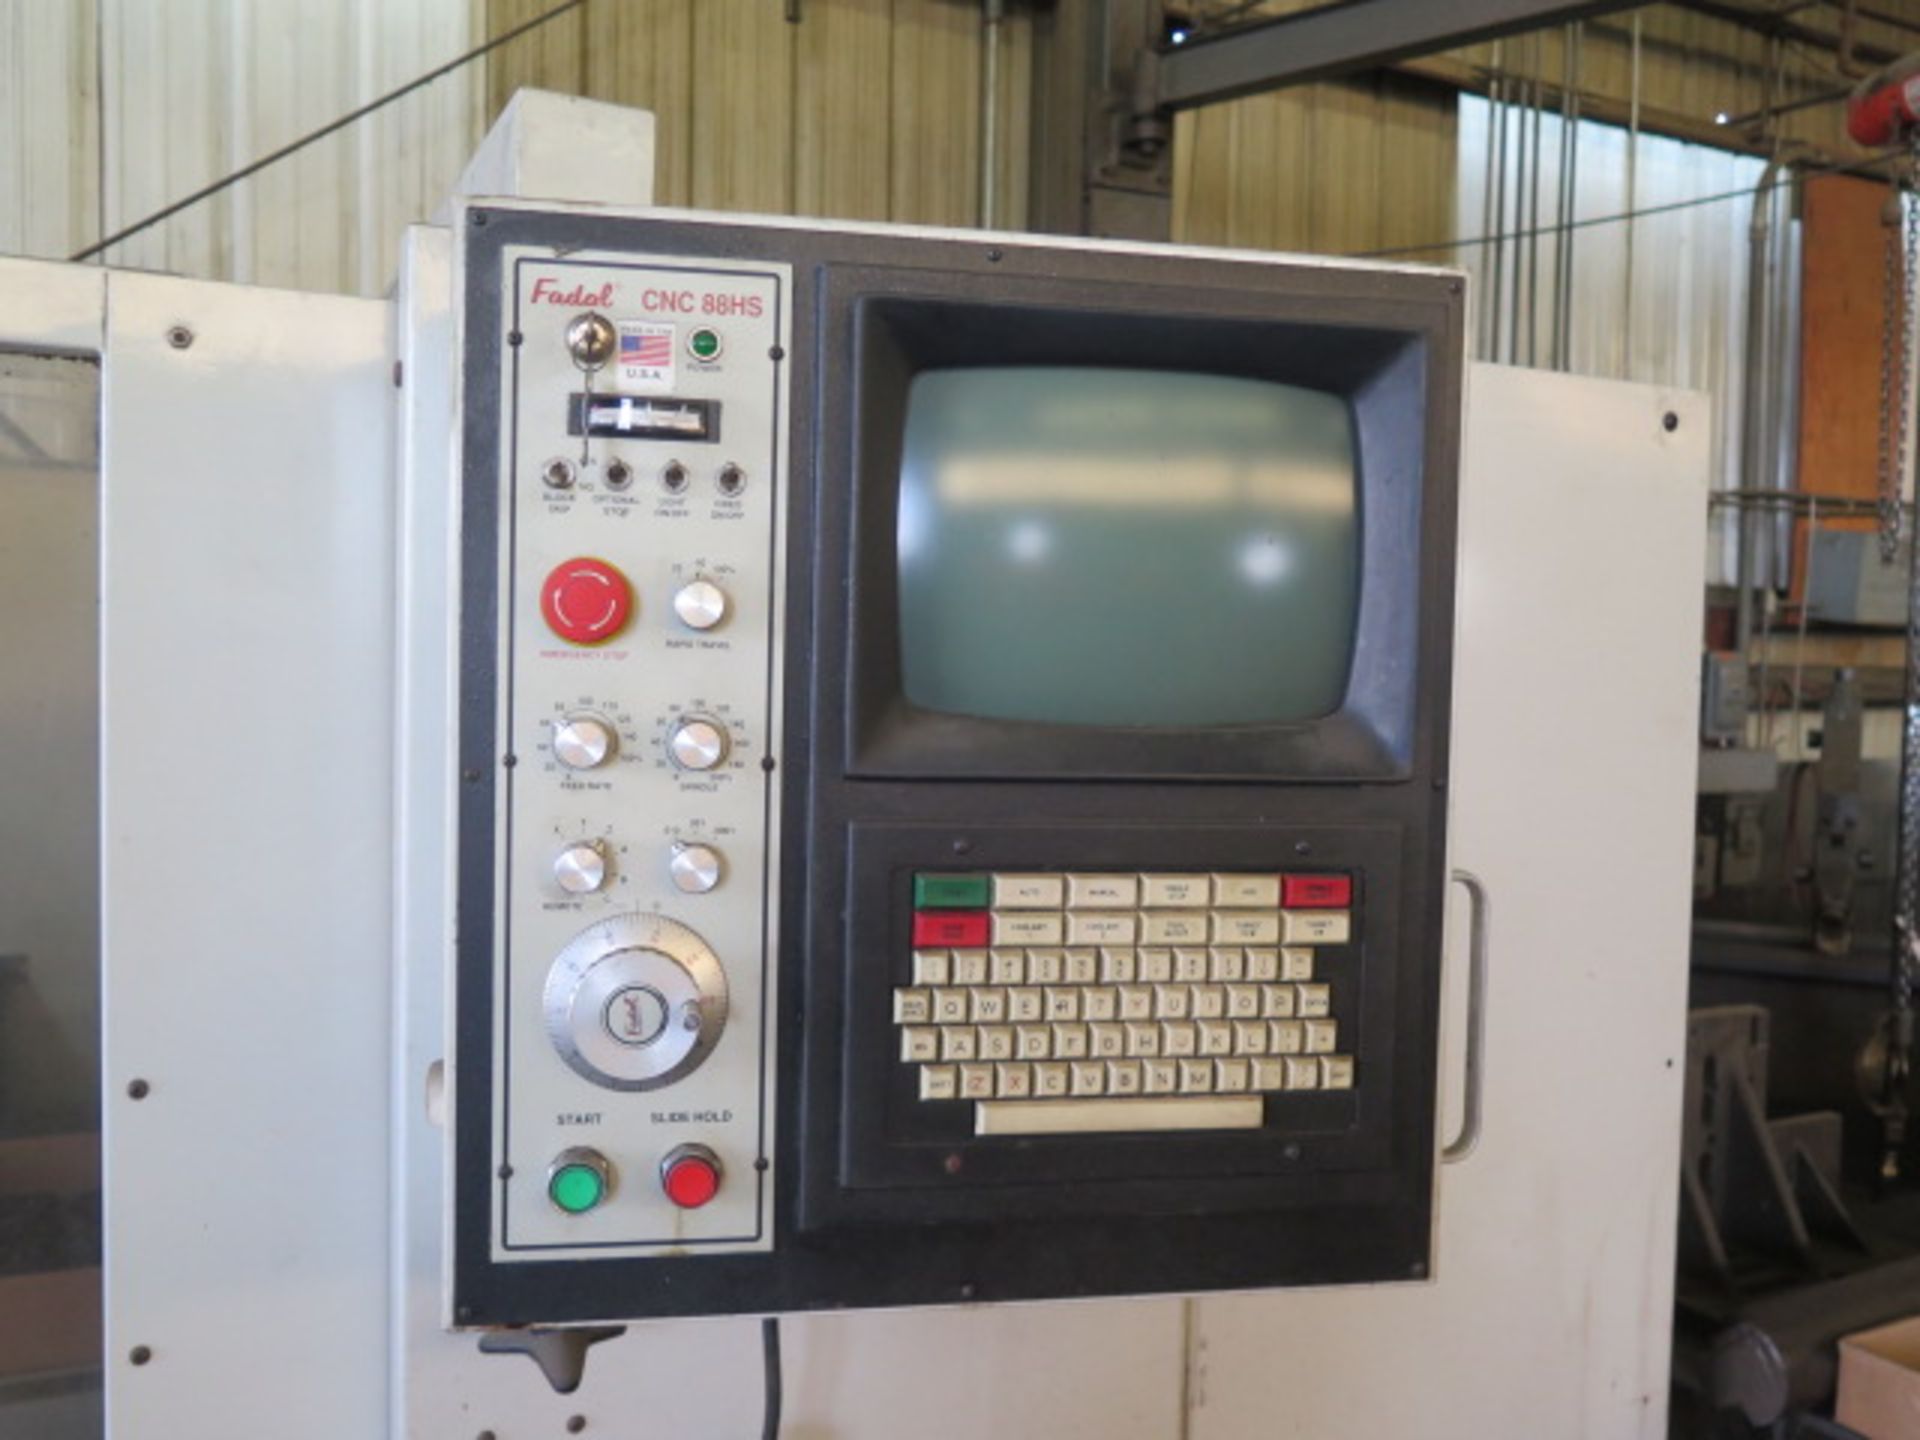 Fadal VMC6030 4-Axis CNC VMC s/n 9506971 w/ Fadal CNC88HS Controls, 21-Station ATC, SOLD AS IS - Image 13 of 15